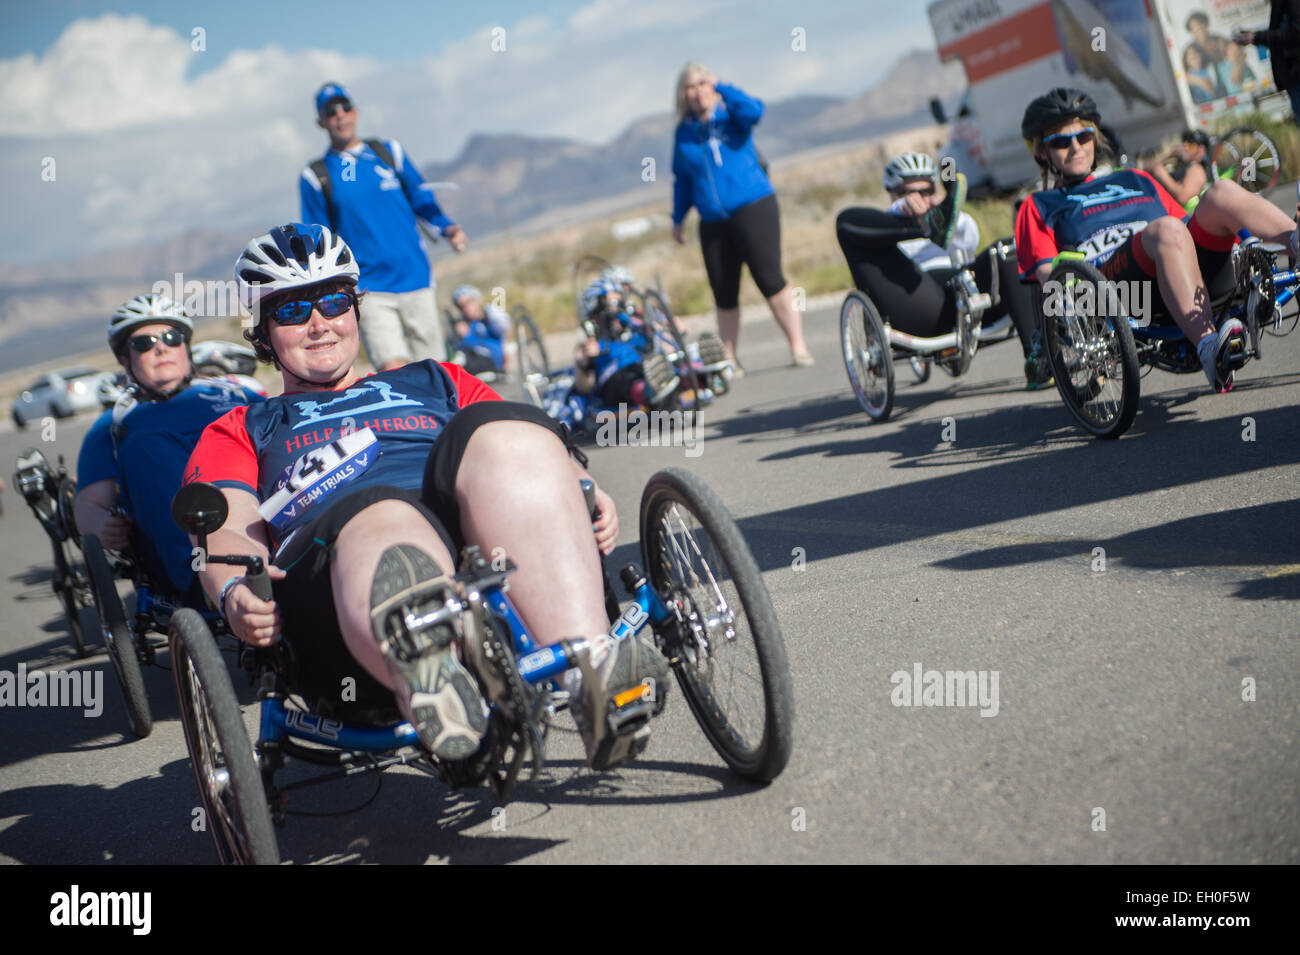 Participants in the 2015 Air Force Wounded Warrior Trials woman's recumbent race prepare to start at Nellis Air Force Base, Nev. Feb. 28, 2015. The recumbent race is one of the three cycling events the warrior athletes competed in. The Air Force Trials are an adaptive sports event designed to promote the mental and physical well-being of seriously ill and injured military members and veterans. More than 105 wounded, ill or injured service men and women from around the country will compete for a spot on the 2015 U.S. Air Force Wounded Warrior Team which will represent the Air Force at adaptive Stock Photo